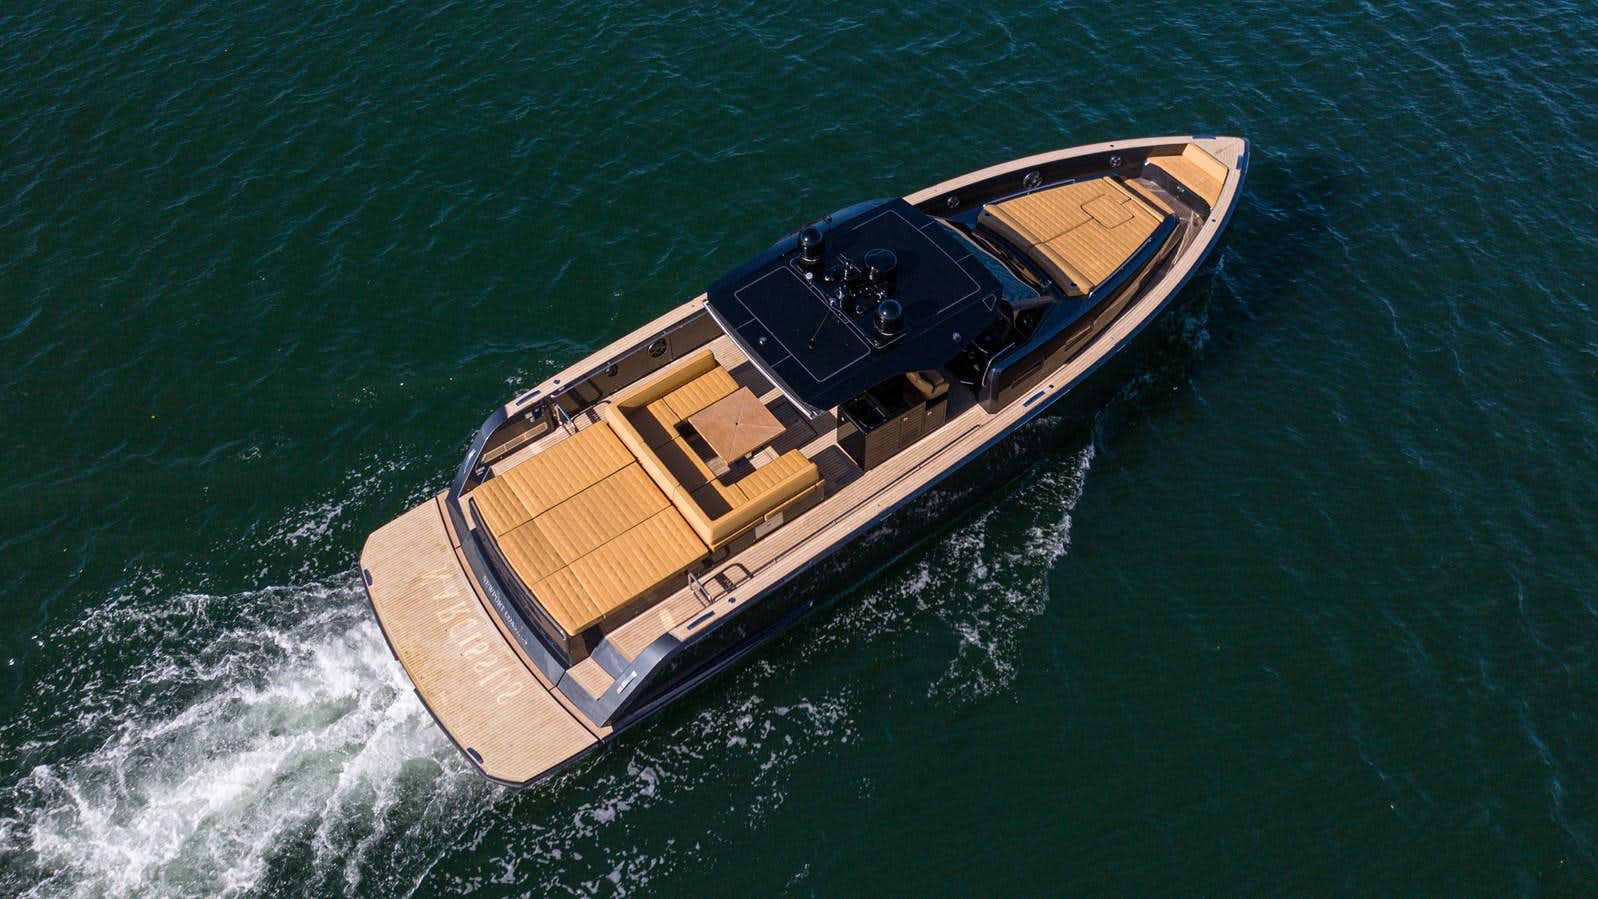 Narcissus
Yacht for Sale